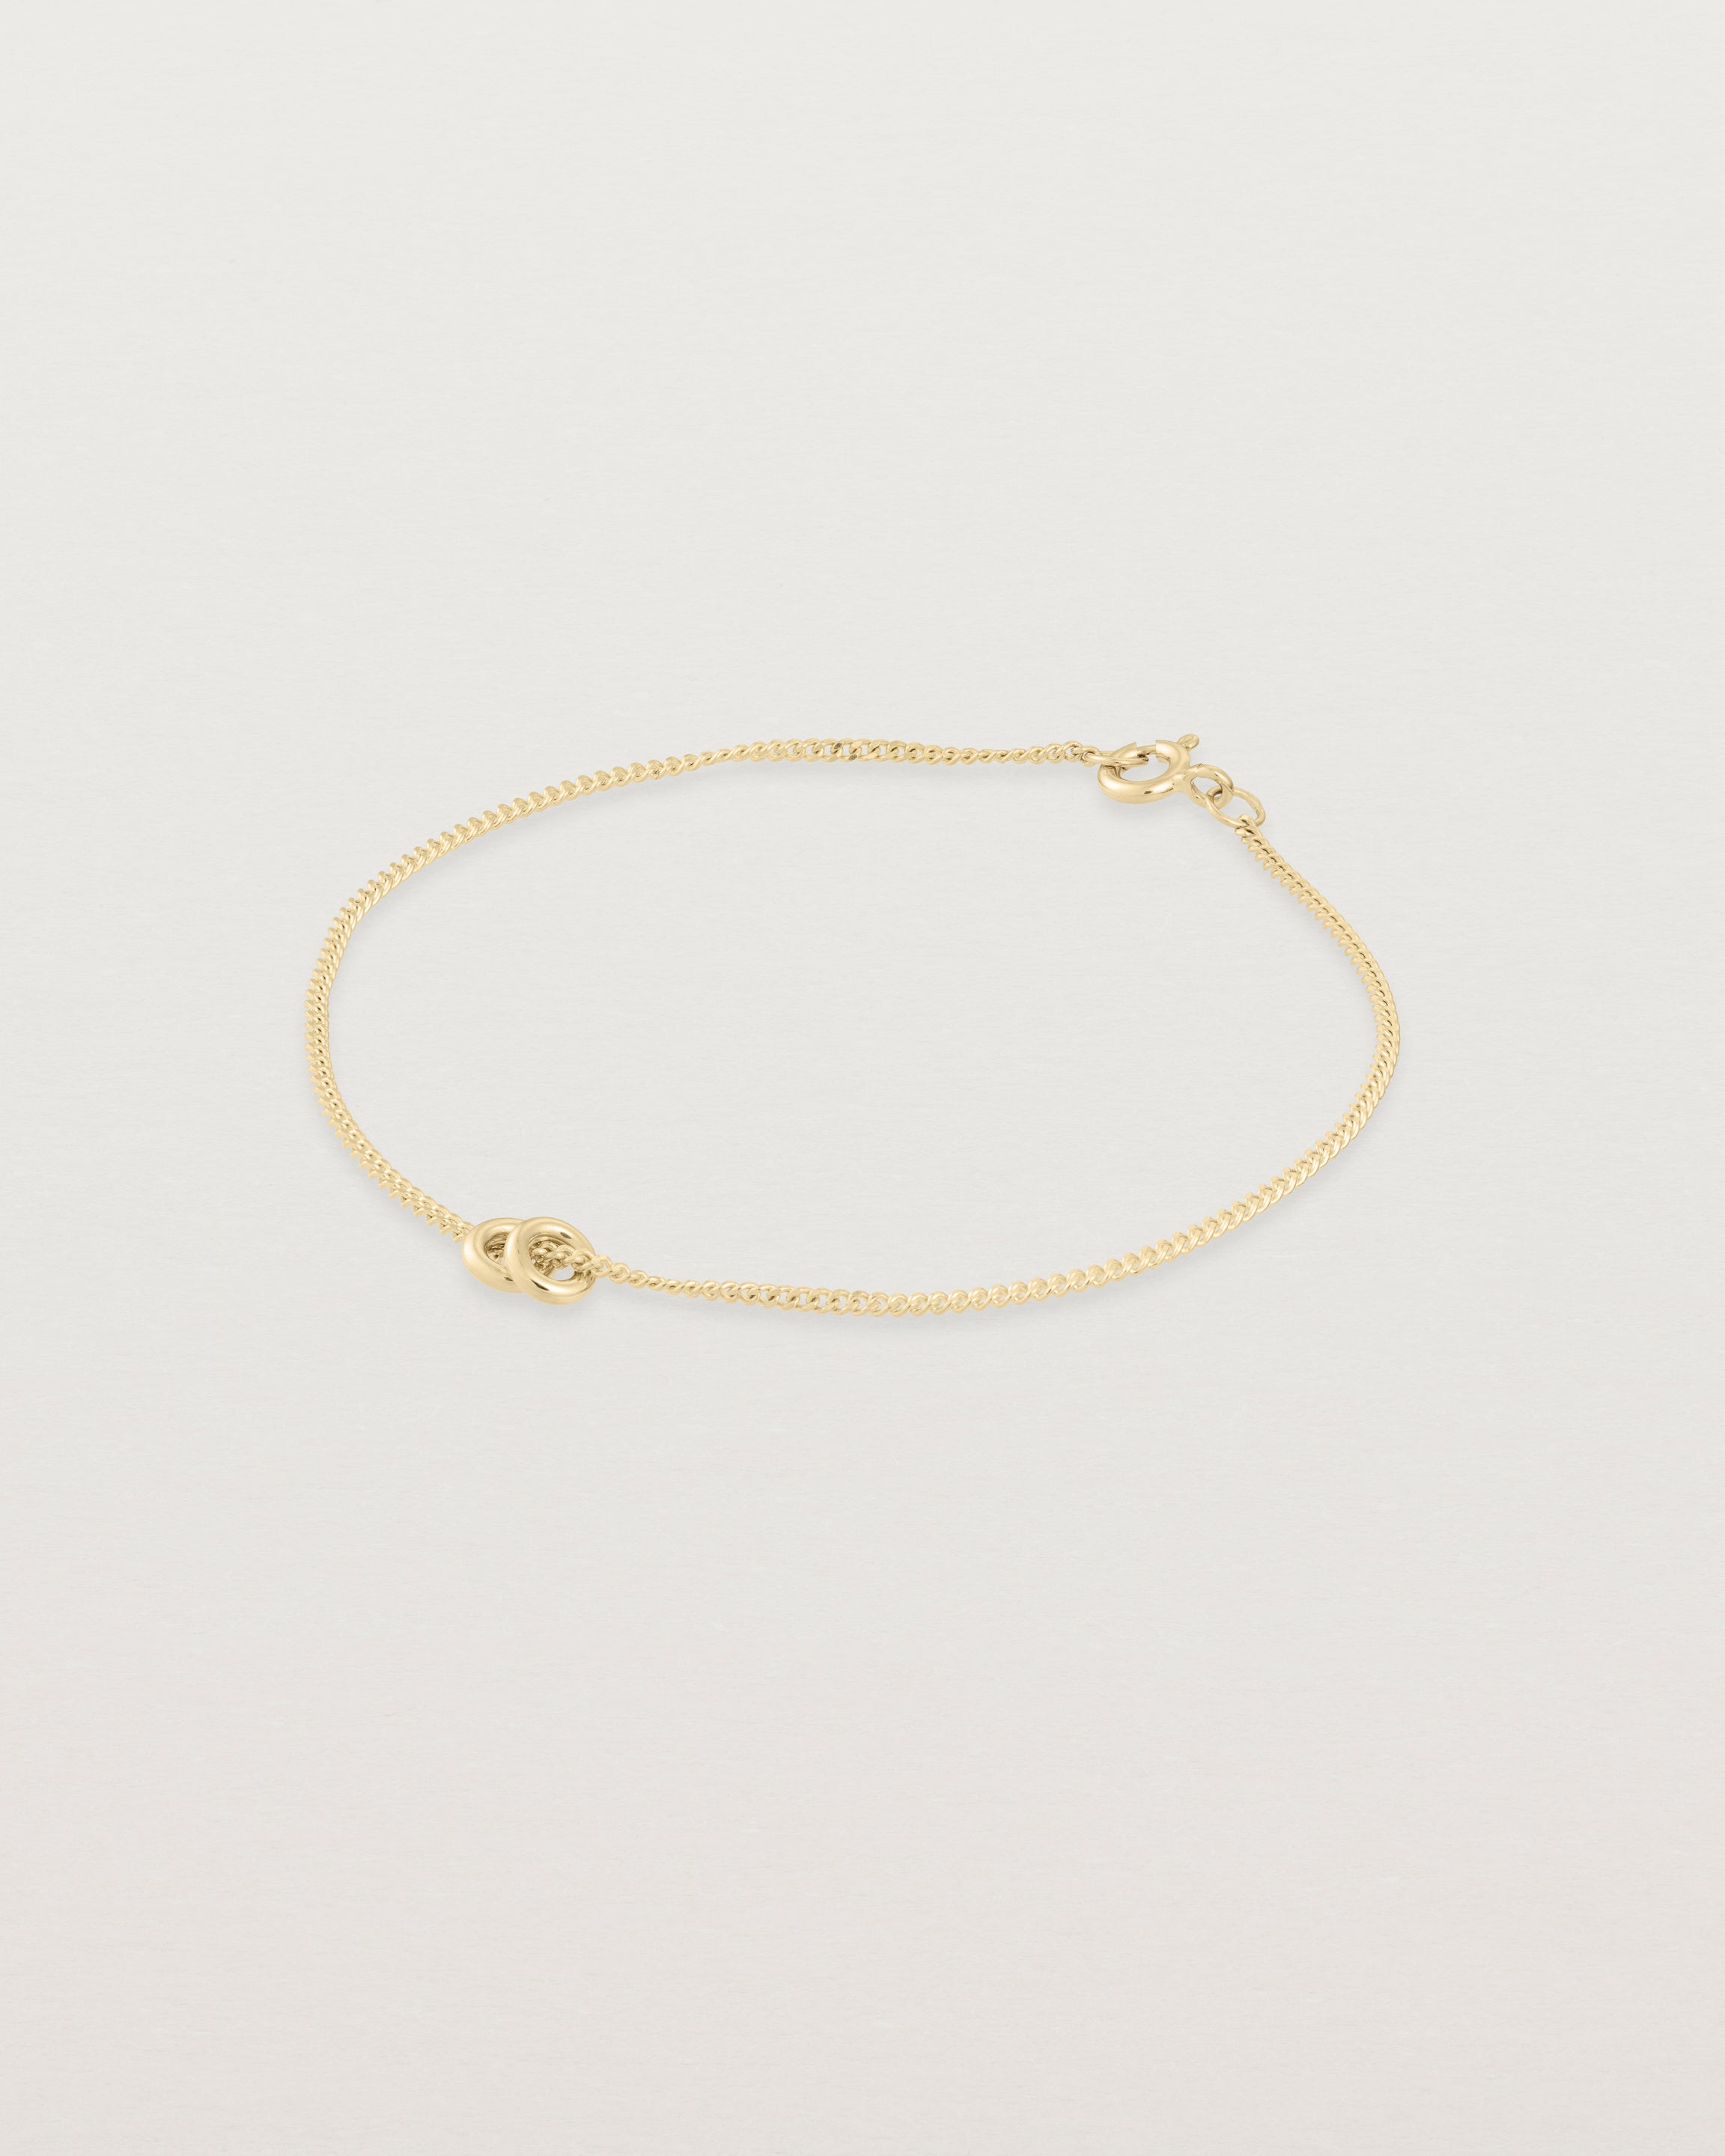 Aether bracelet featuring two round charms in yellow gold